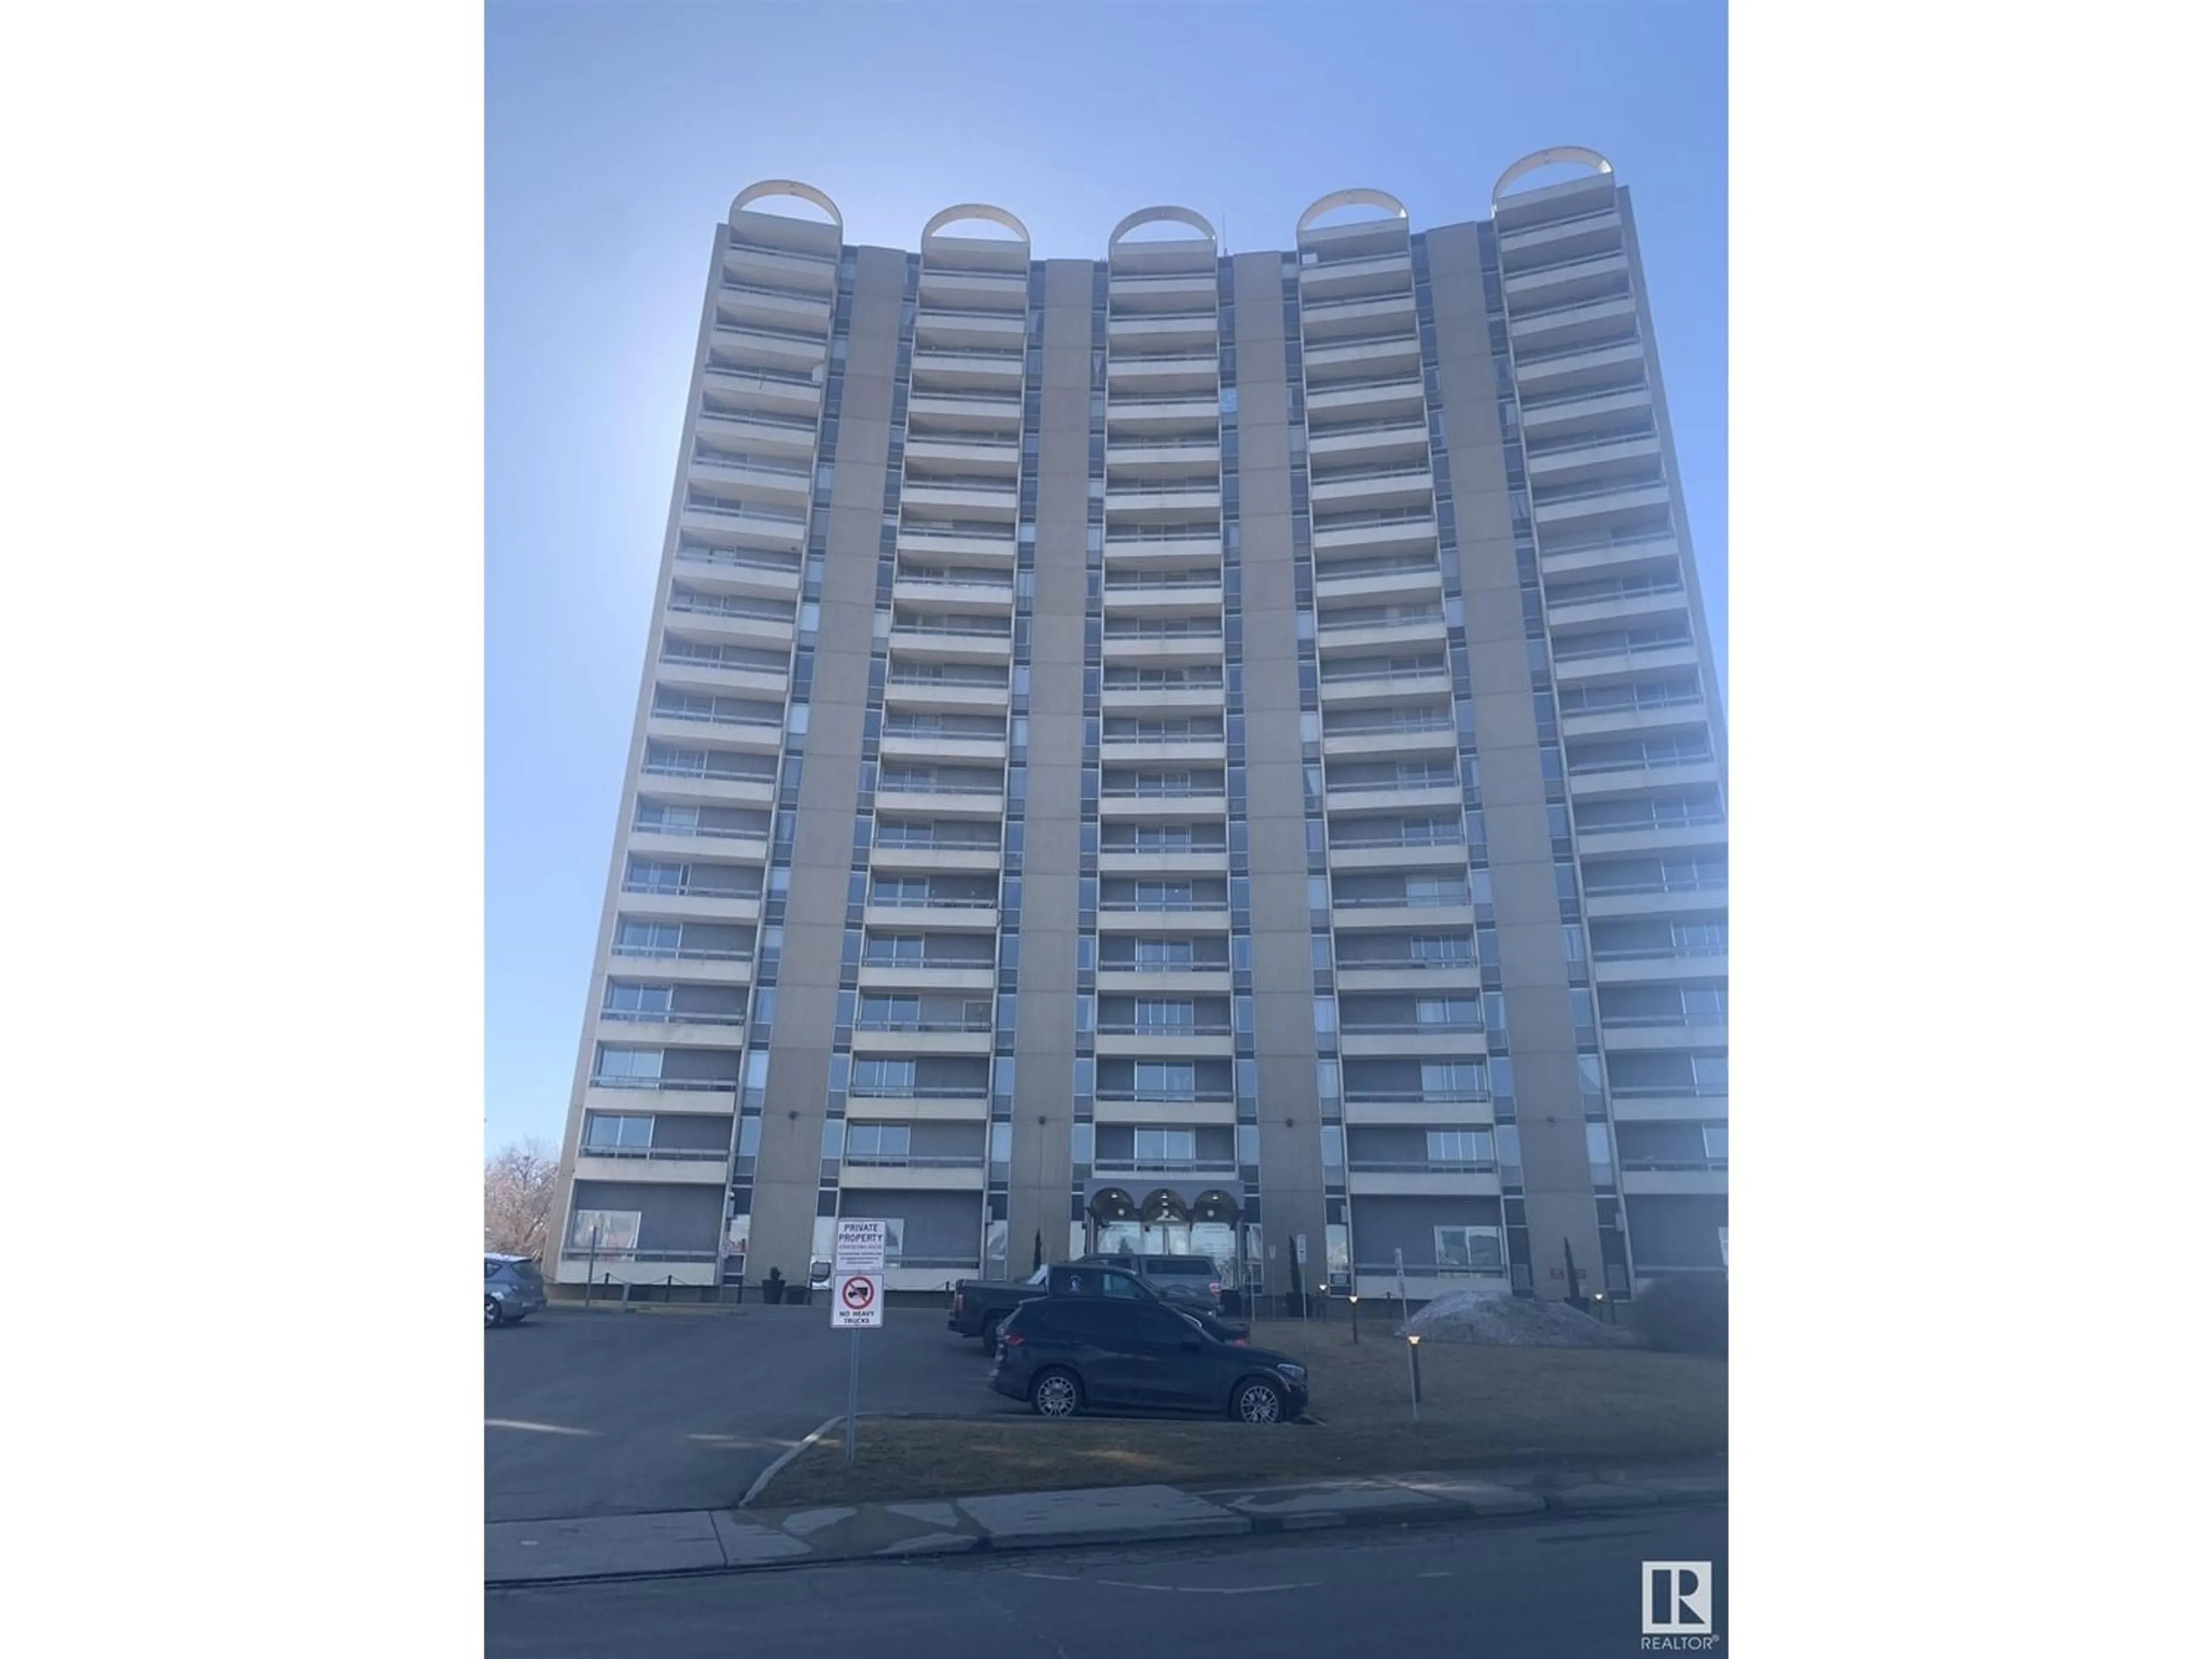 A pic from exterior of the house or condo for #1712 10883 SASKATCHEWAN DR NW, Edmonton Alberta T6E4S6